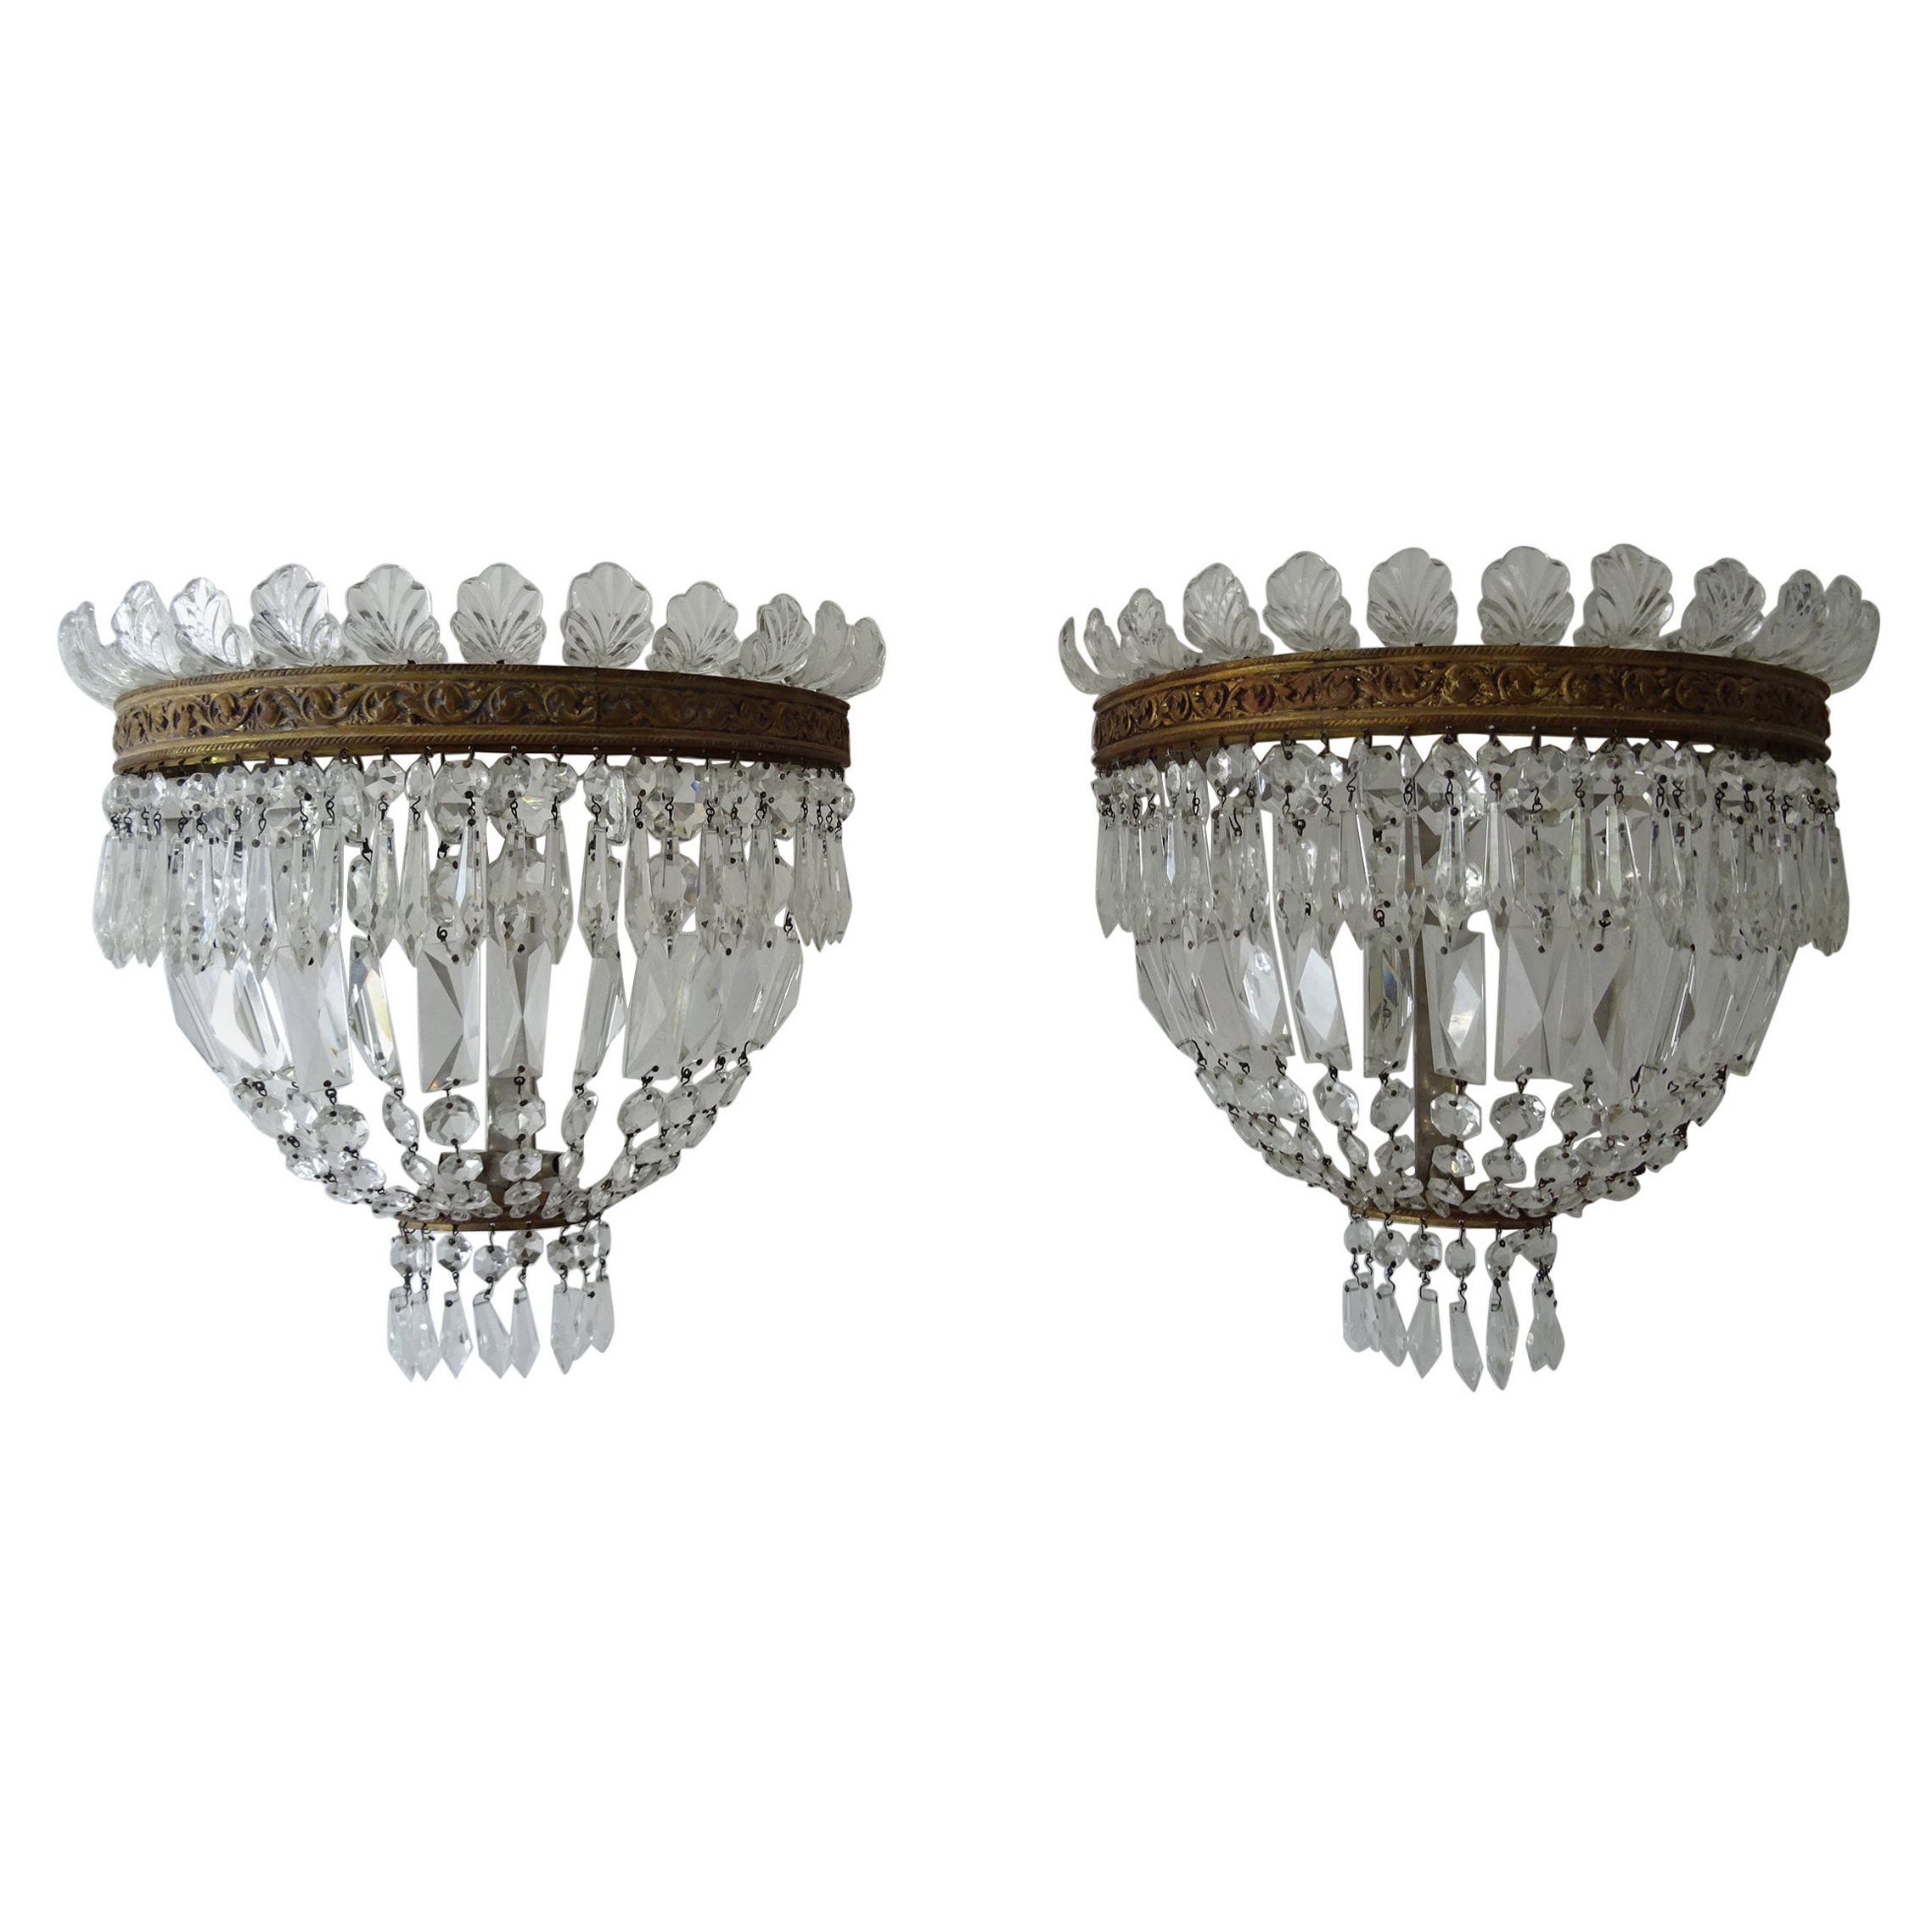 French Huge Empire Crystal Tiered Bronze Sconces, c 1940 For Sale